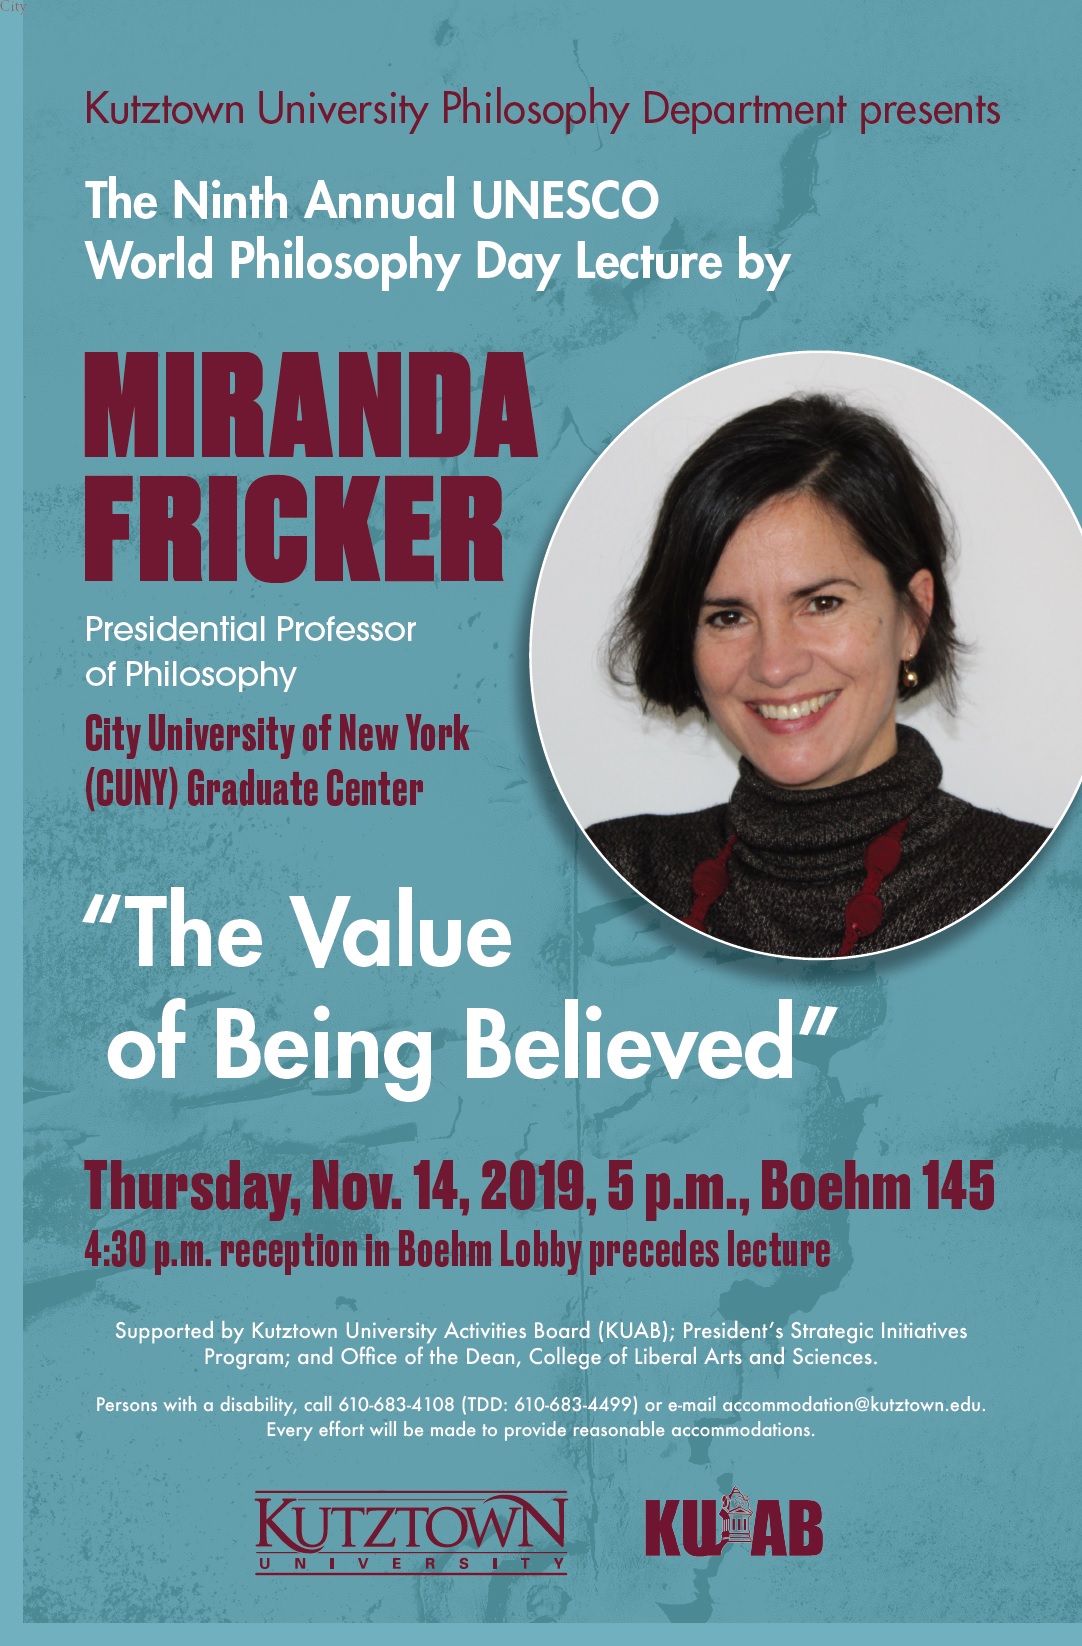 Poster of “The Ninth Annual UNESCO World Philosophy Day Lecture” by Dr. Miranda Fricker. Topic: “The Value of Being Believed”. Date: November 14, 2019 5 p.m., Boehm 145